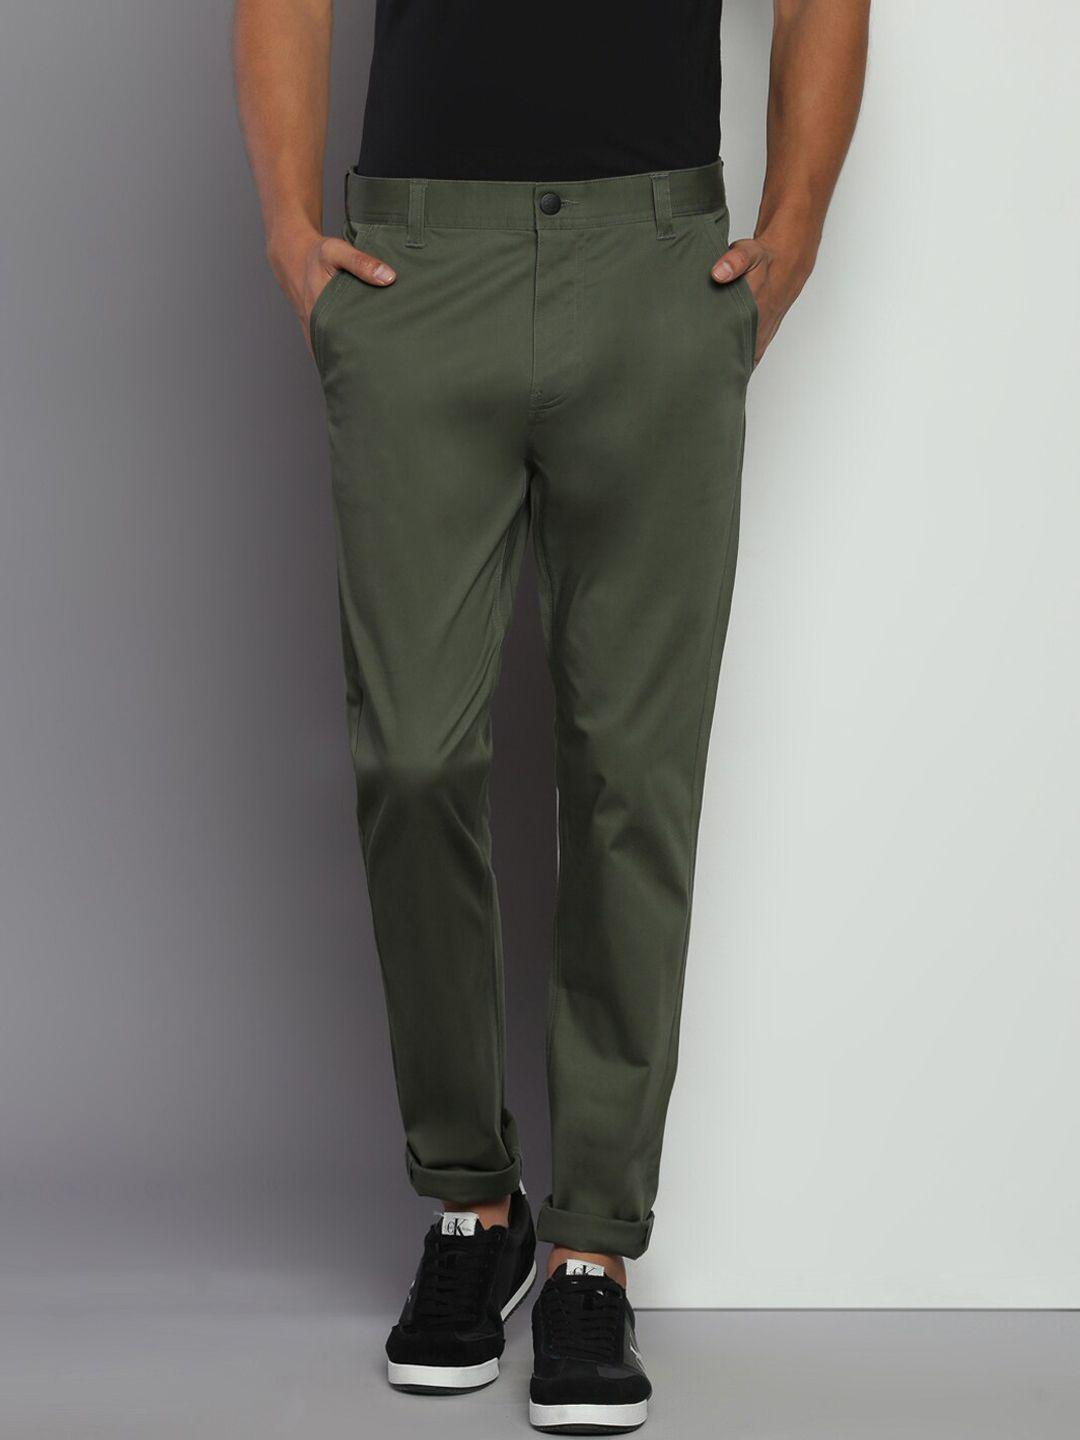 calvin klein jeans men slim fit chinos trousers